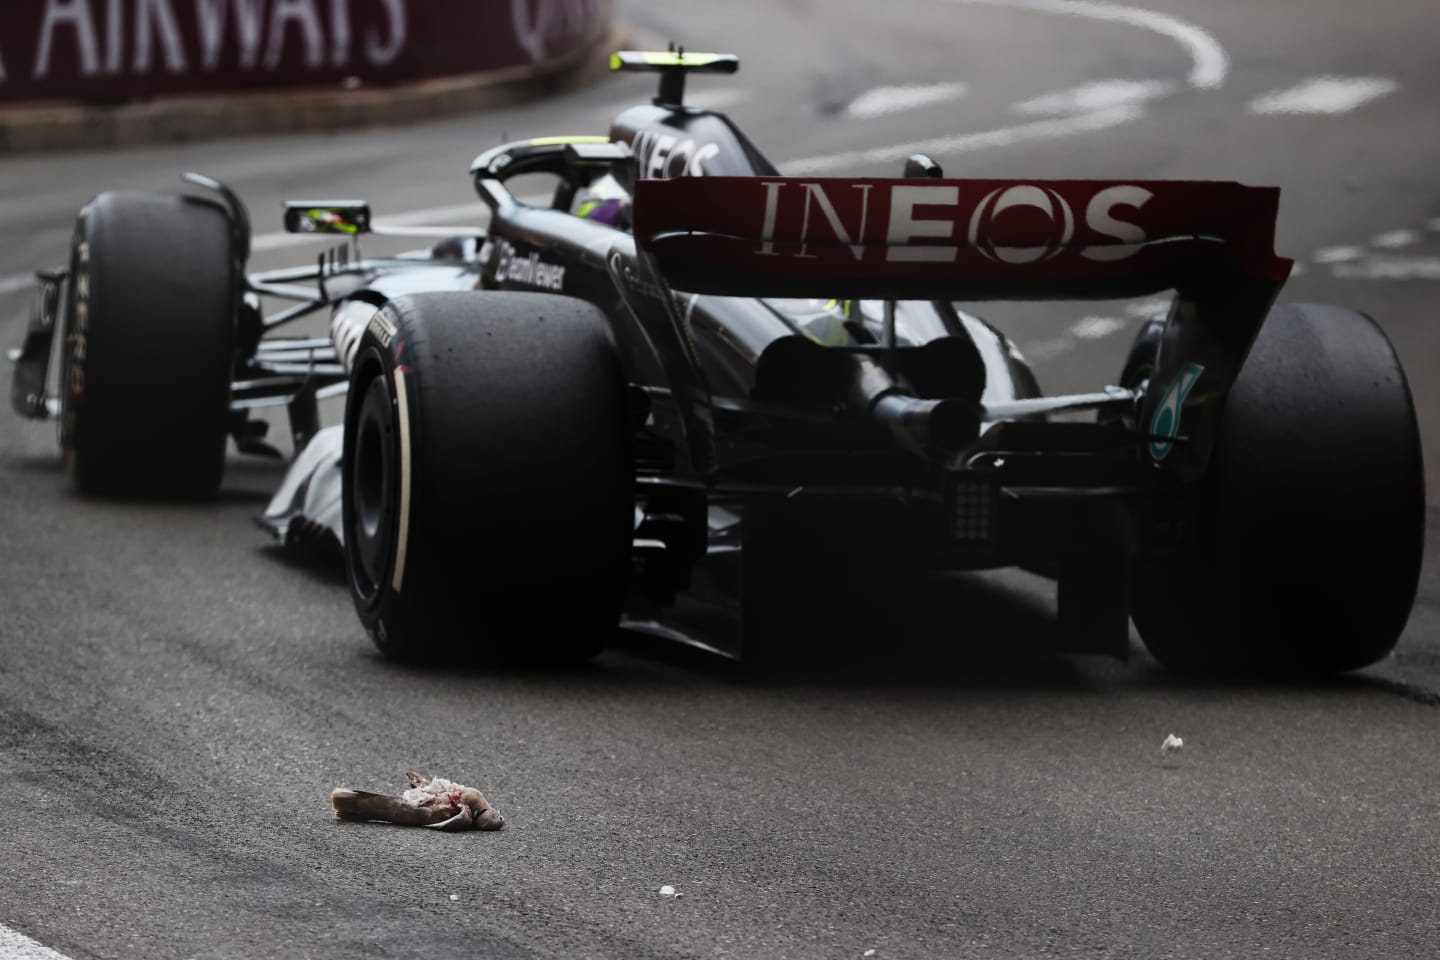 MONTE-CARLO, MONACO - MAY 28: Lewis Hamilton of Great Britain driving the (44) Mercedes AMG Petronas F1 Team W14 passes a dead bird on track during the F1 Grand Prix of Monaco at Circuit de Monaco on May 28, 2023 in Monte-Carlo, Monaco. (Photo by Ryan Pierse/Getty Images)